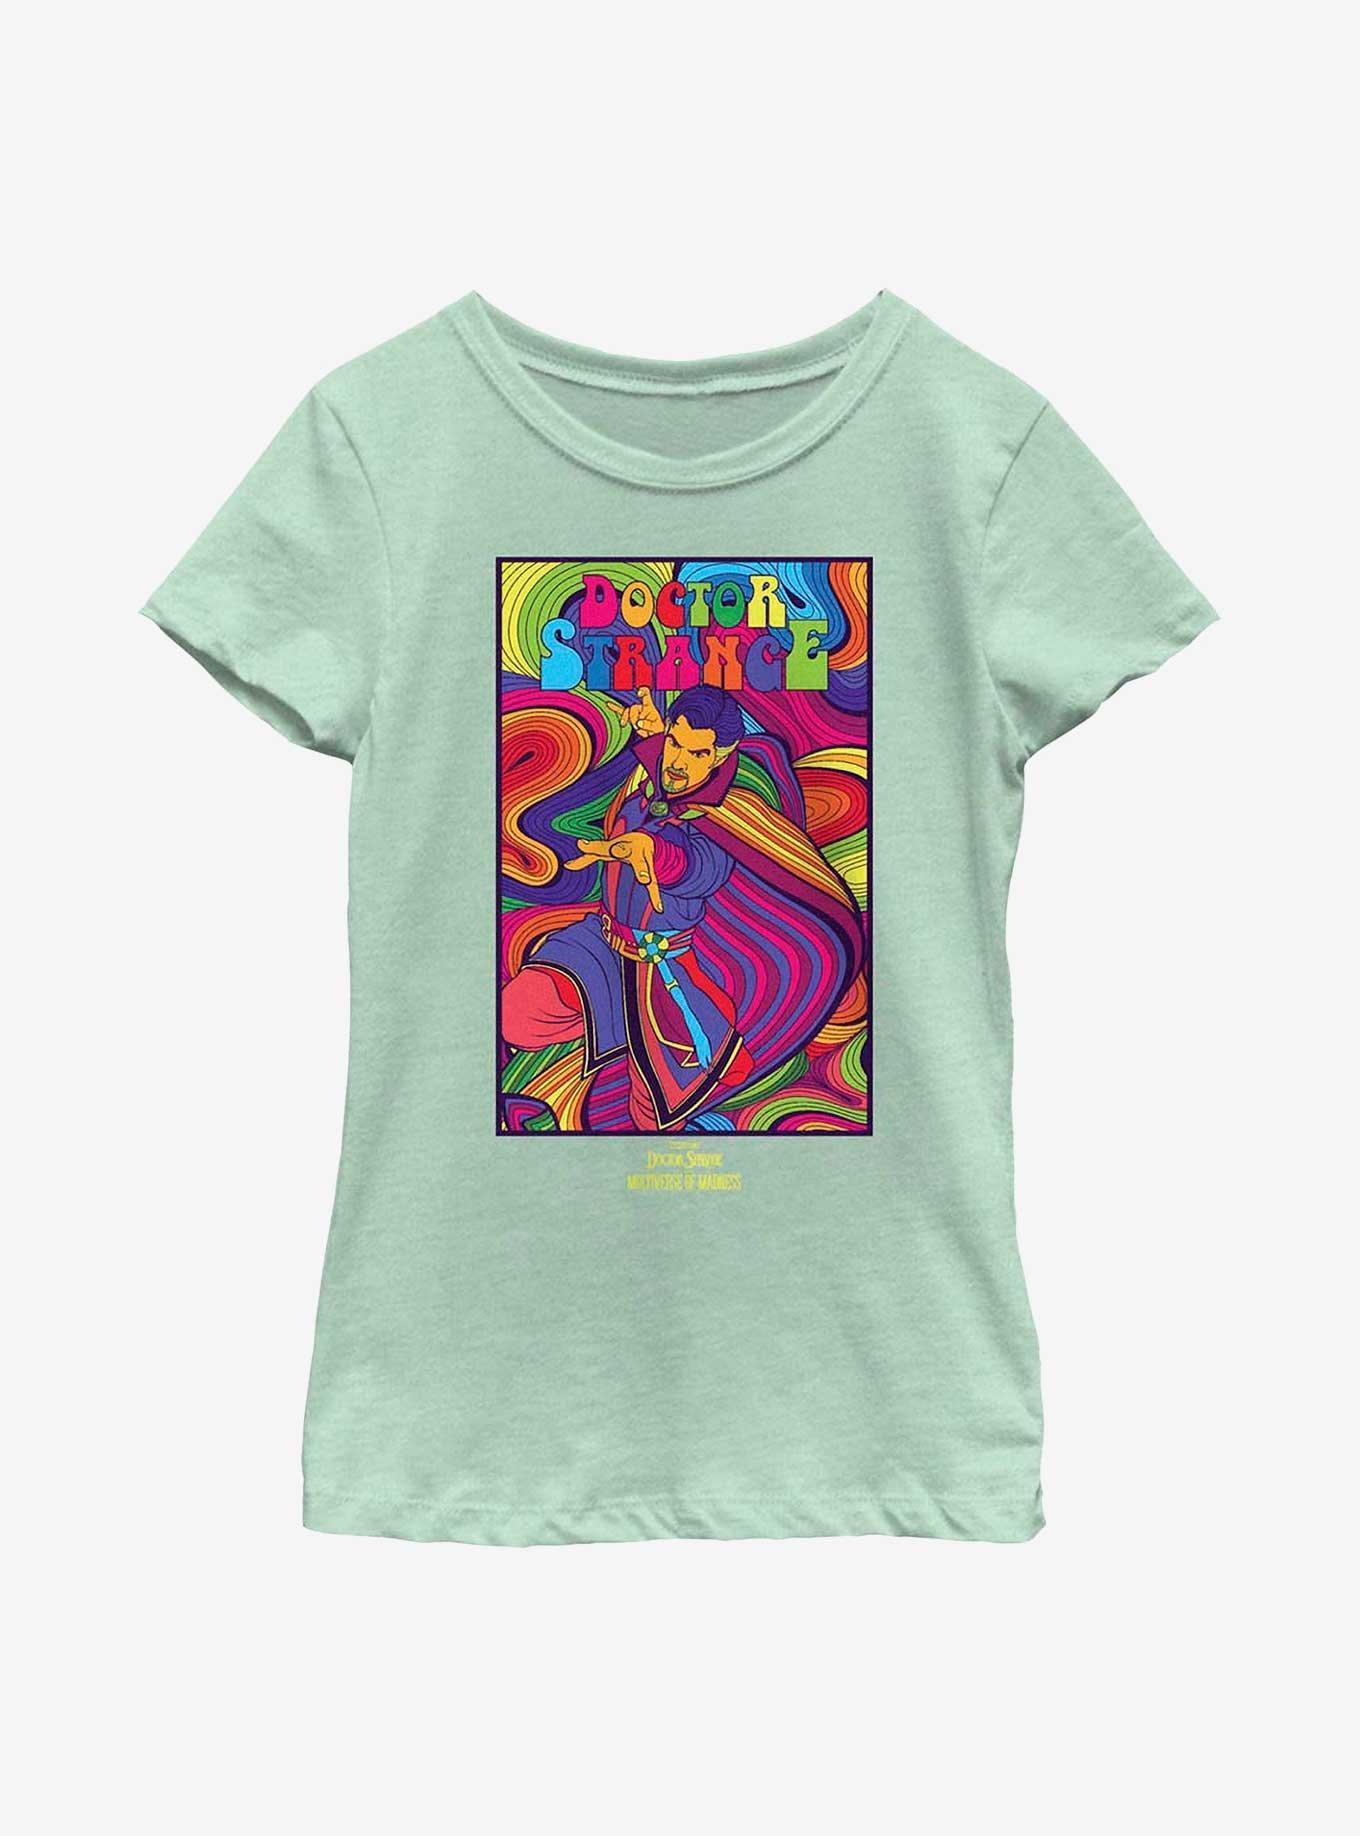 Marvel Doctor Strange In The Multiverse Of Madness Psychadelic Youth Girls T-Shirt, MINT, hi-res